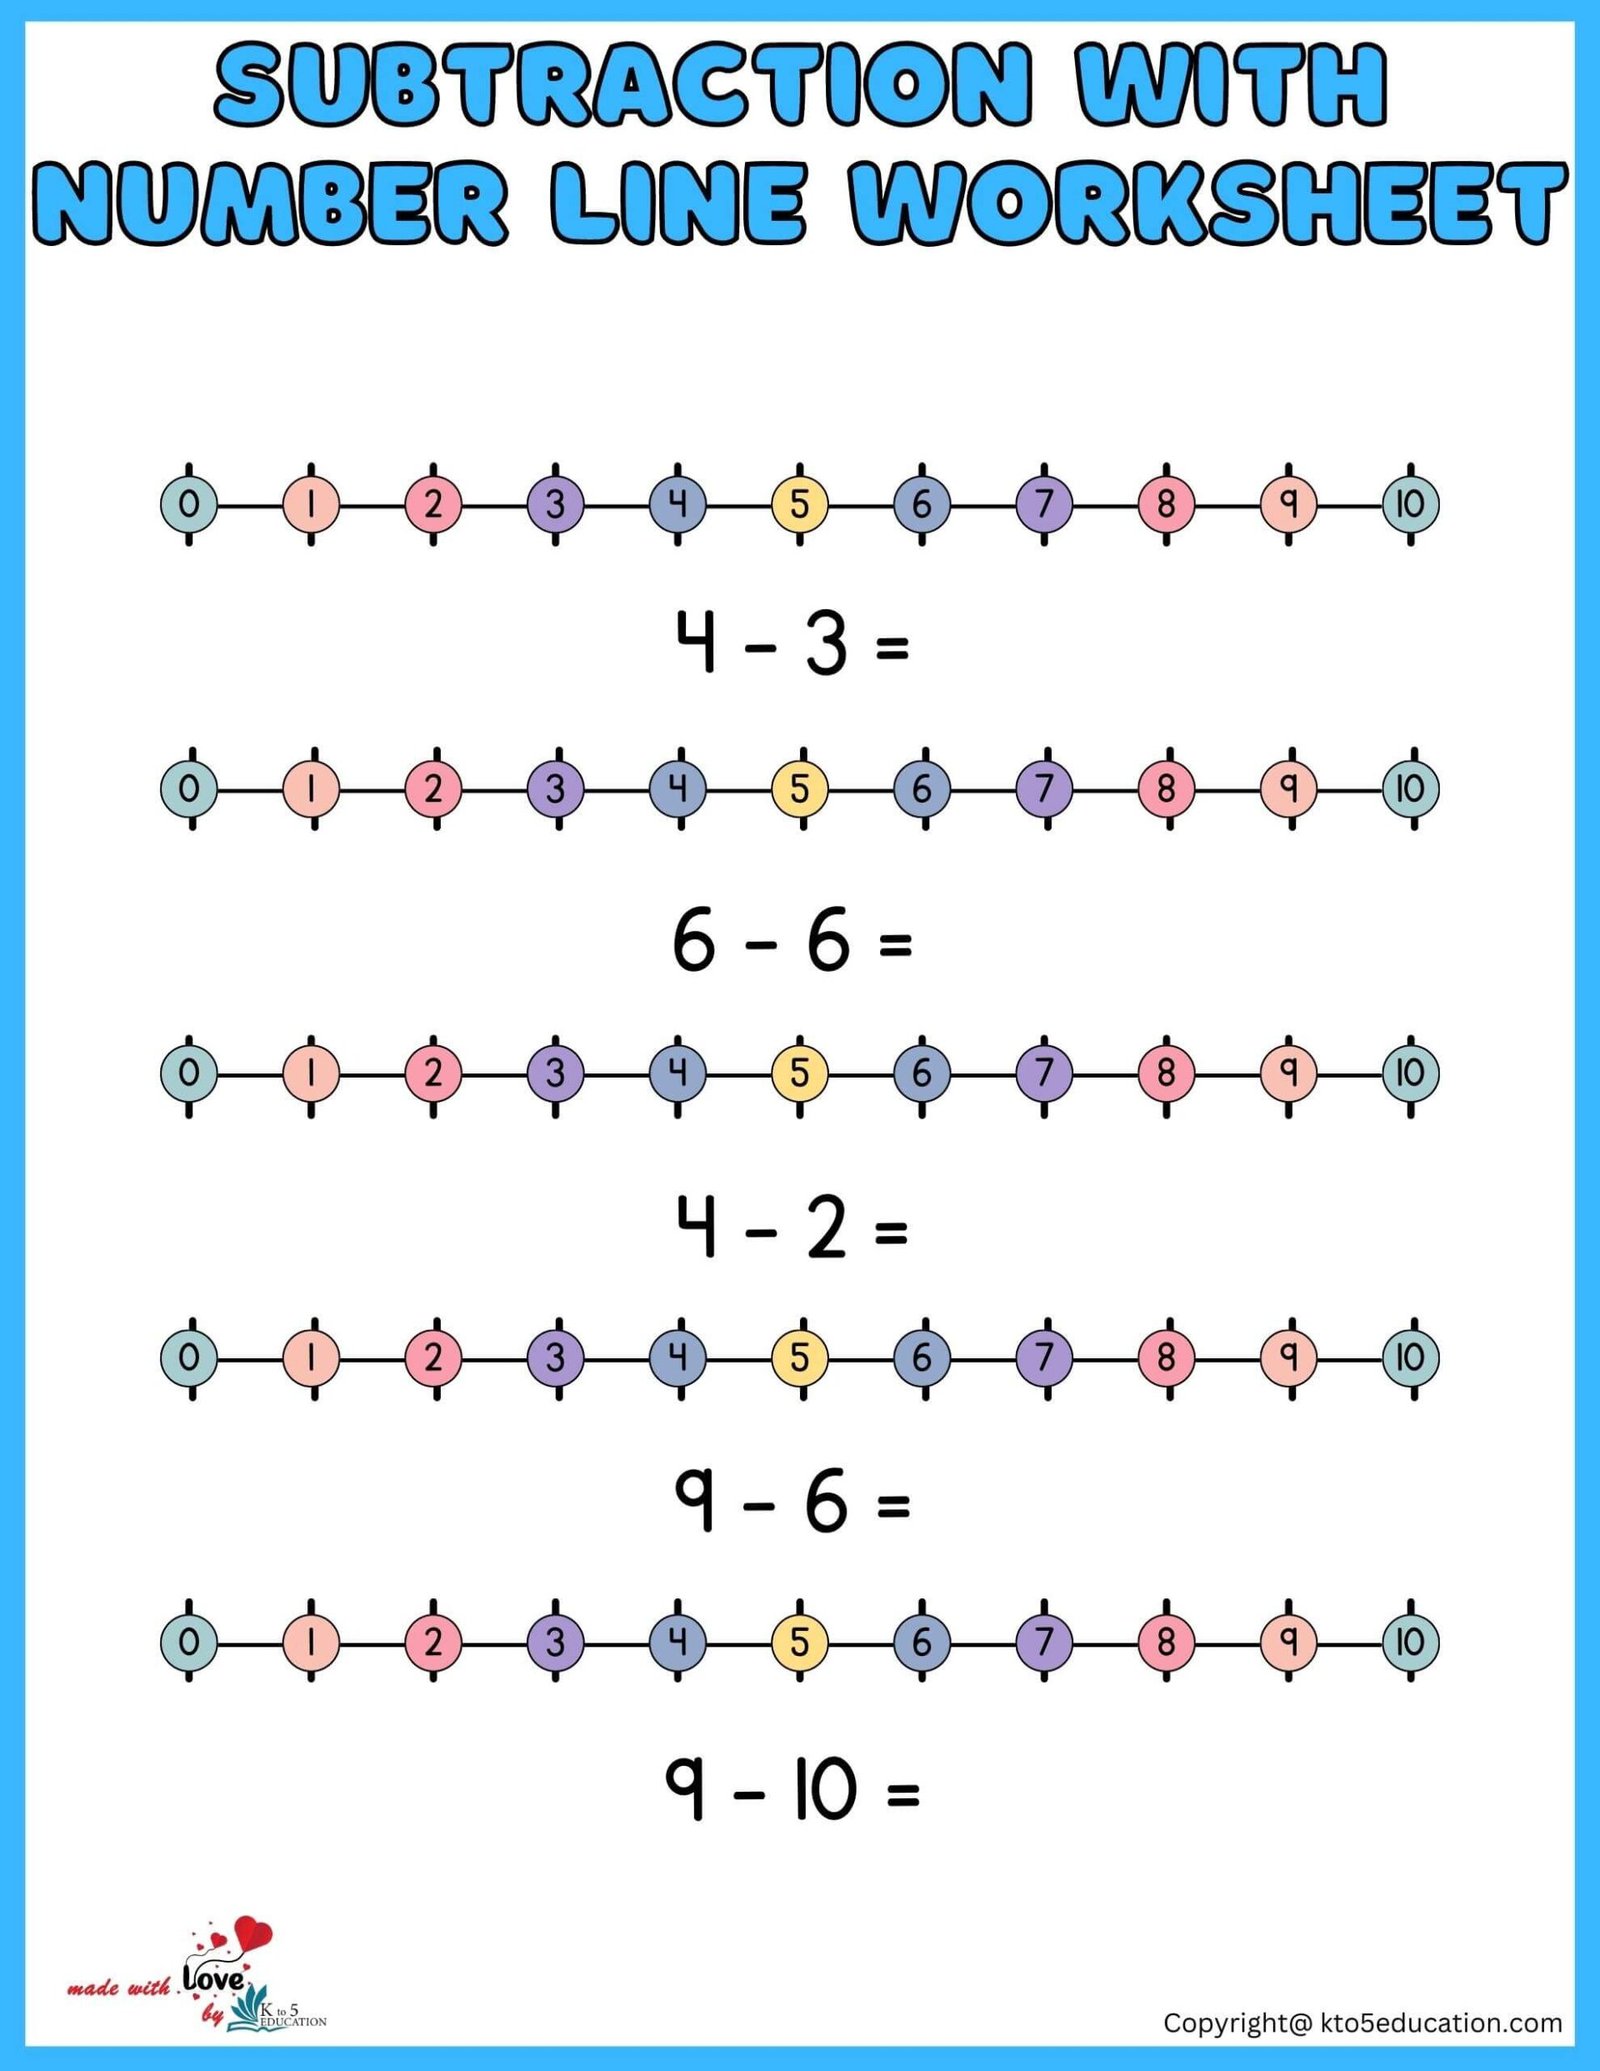 Free Subtraction With Number Line Worksheet 1 10 For